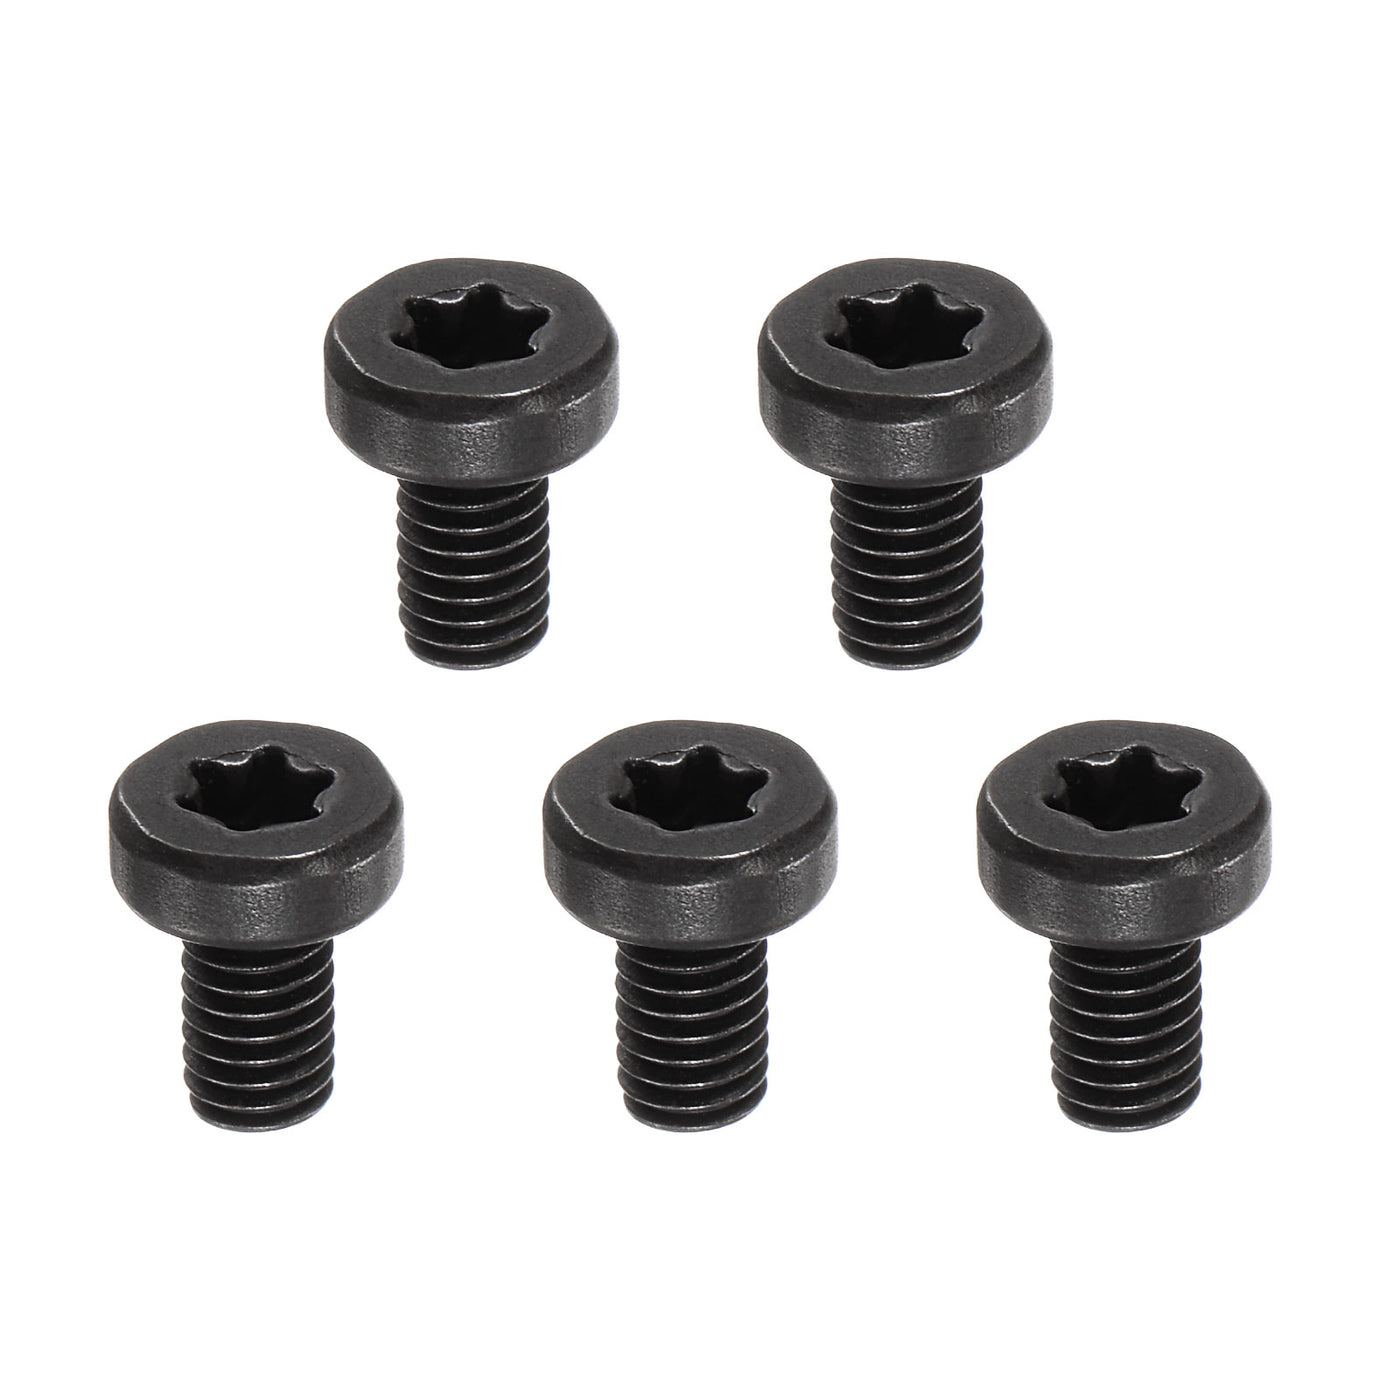 Uxcell Uxcell M3x7-0.5 Torx Set Screws for Carbide Insert Lathe Turning Tool Holder, 5Pcs